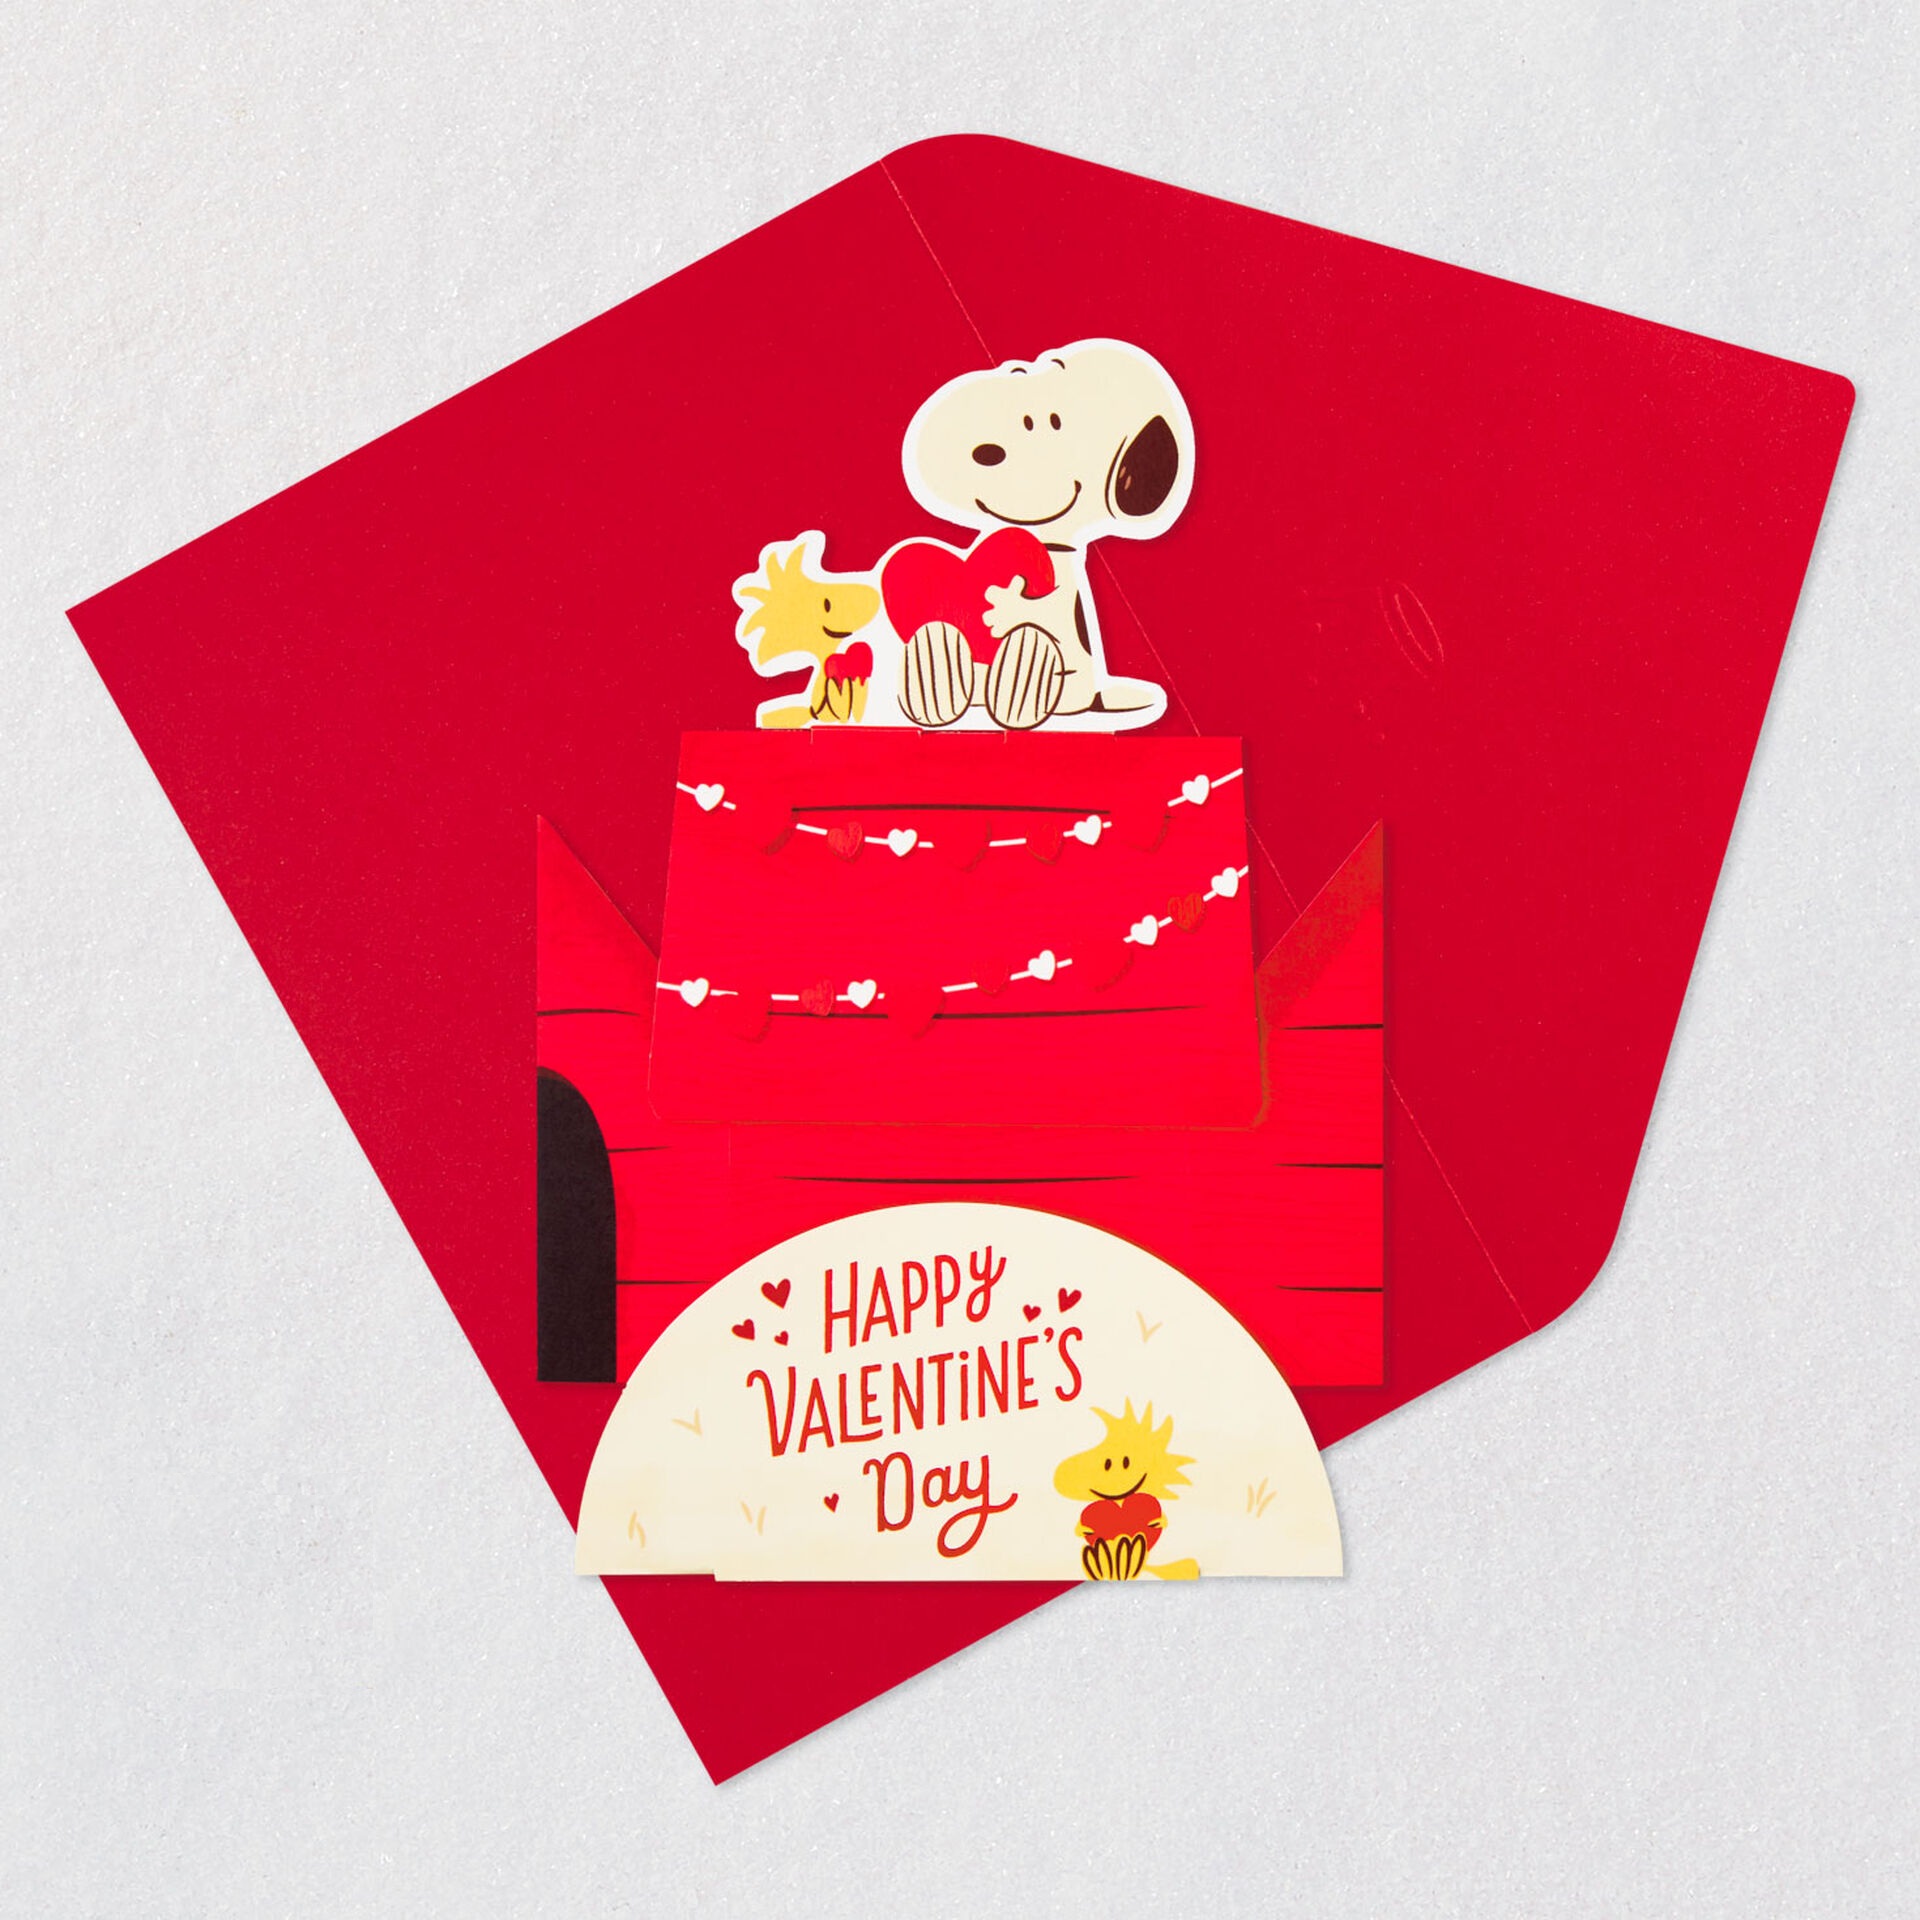 Snoopy-&-Woodstock-Doghouse-3D-PopUp-Valentines-Day-Card_599VWF9003_06